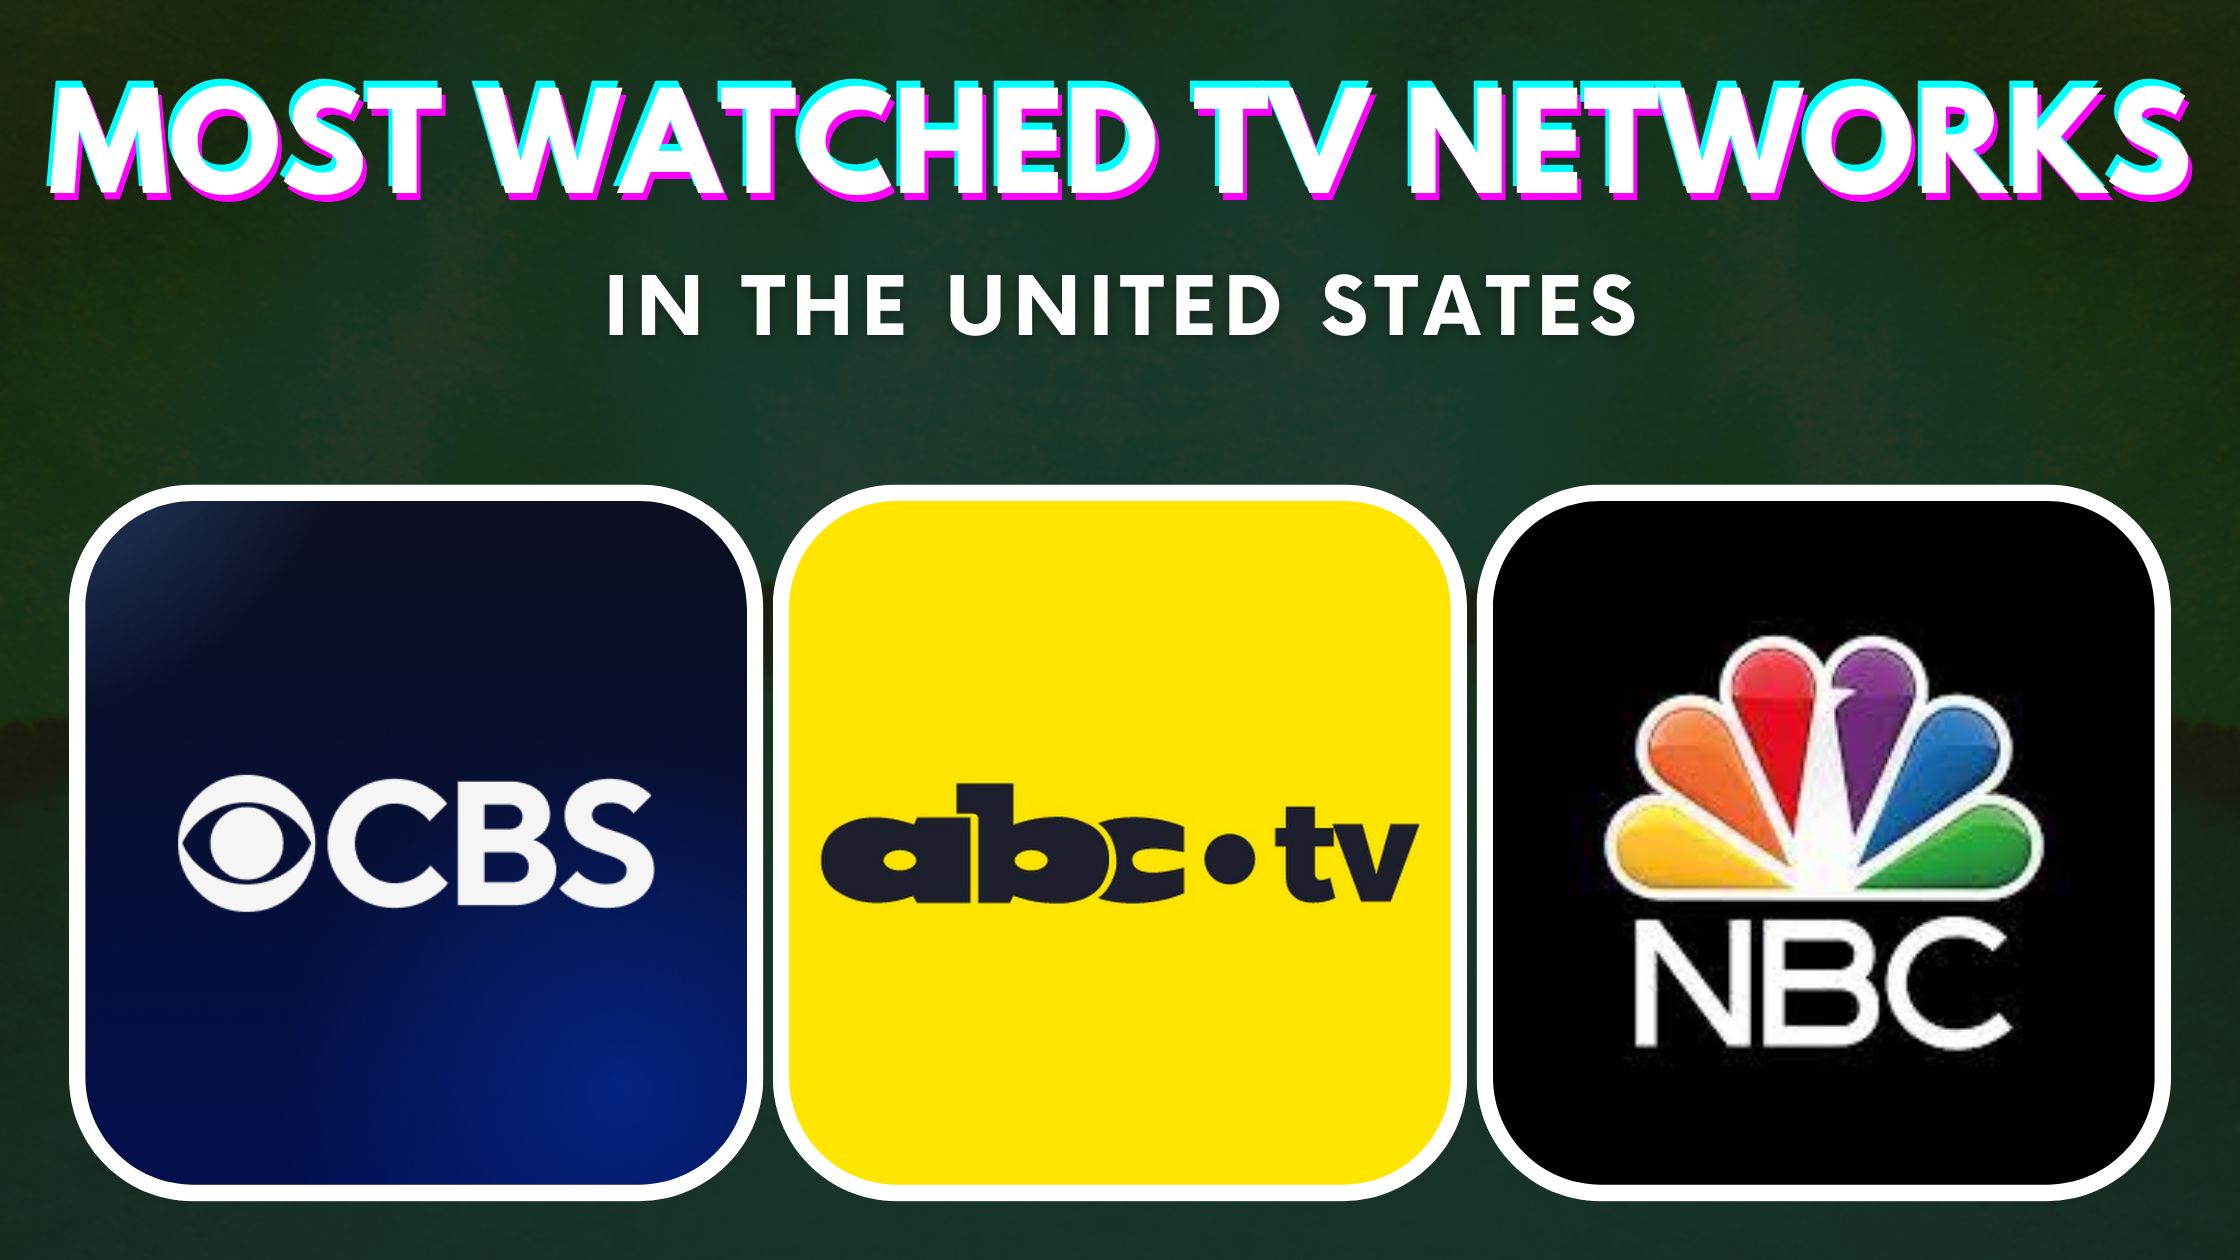 Top 10 Most Watched TV Networks In The U.S.